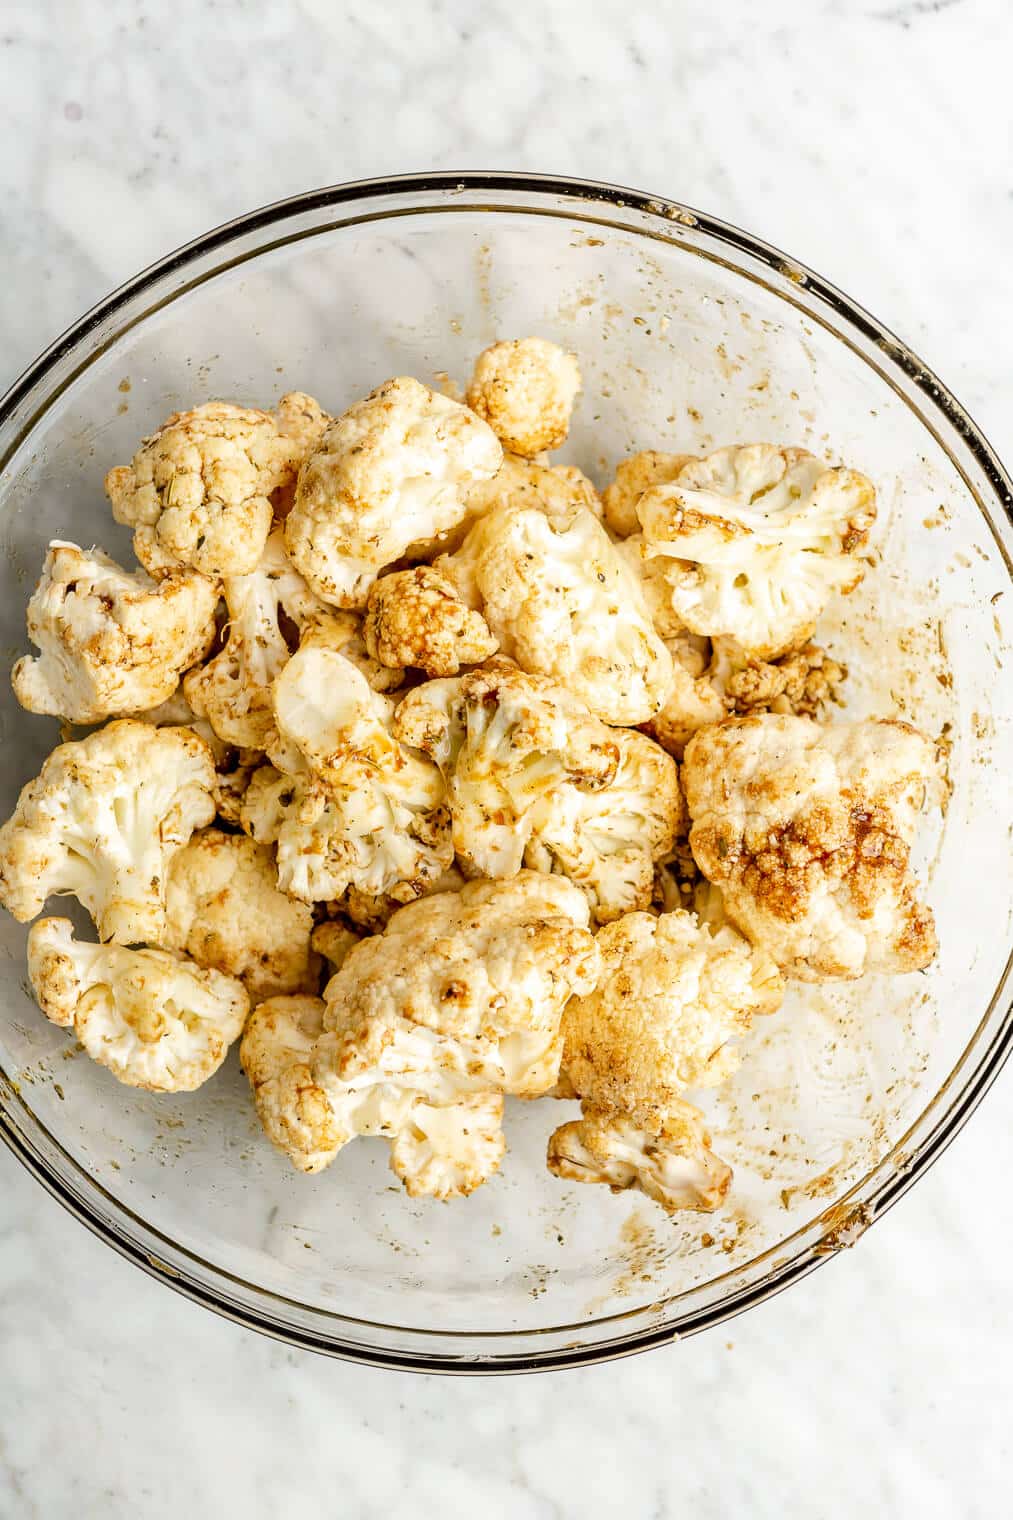 Raw cauliflower florets tossed with a balsamic marinade.